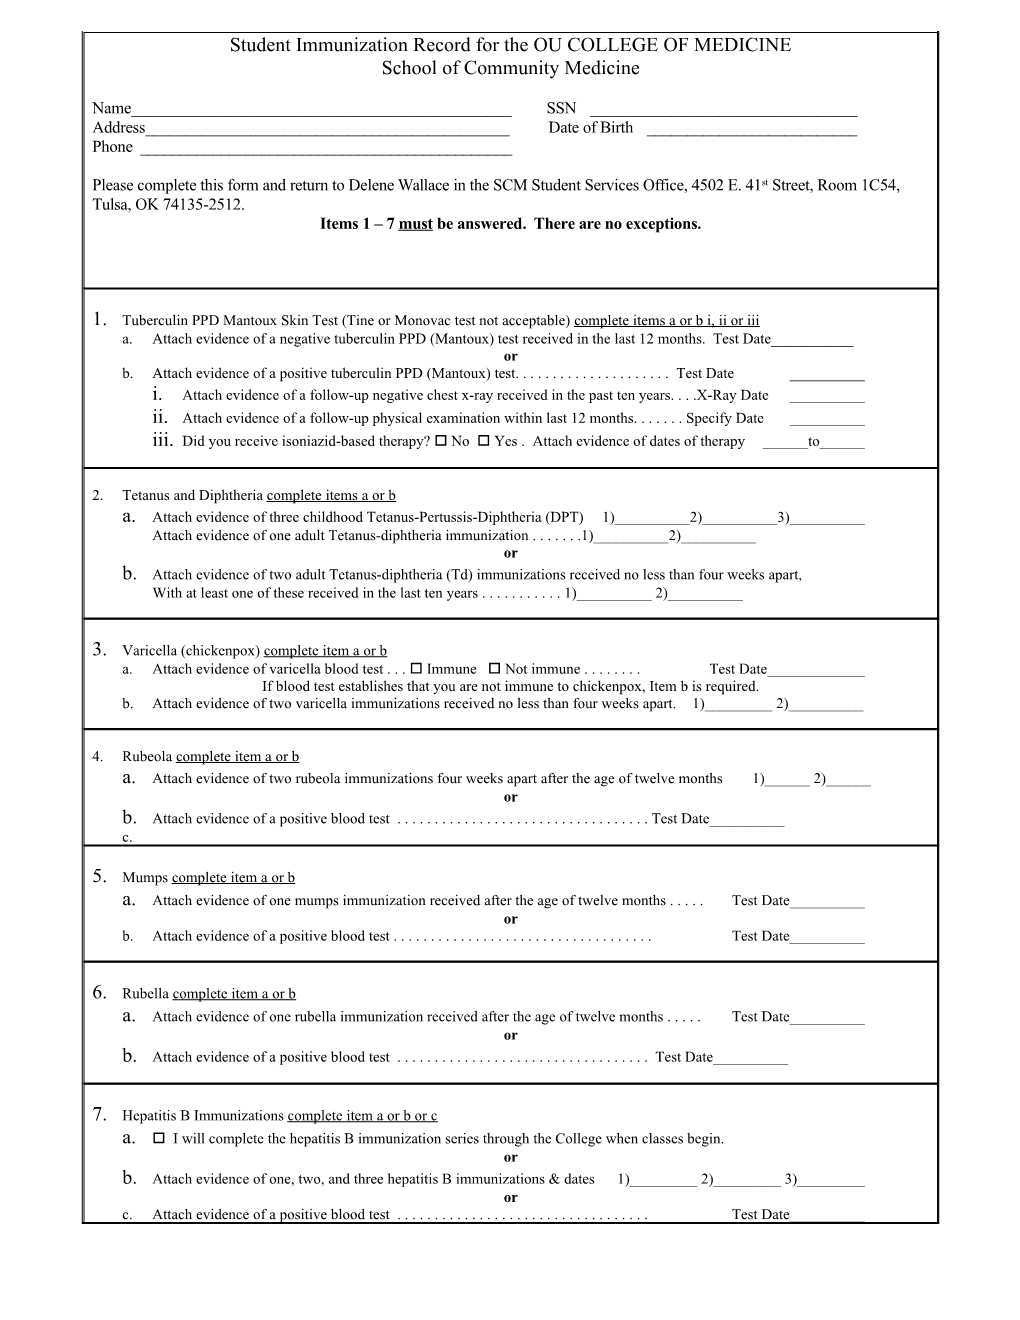 Student Health Form for the COLLEGE of MEDICINE